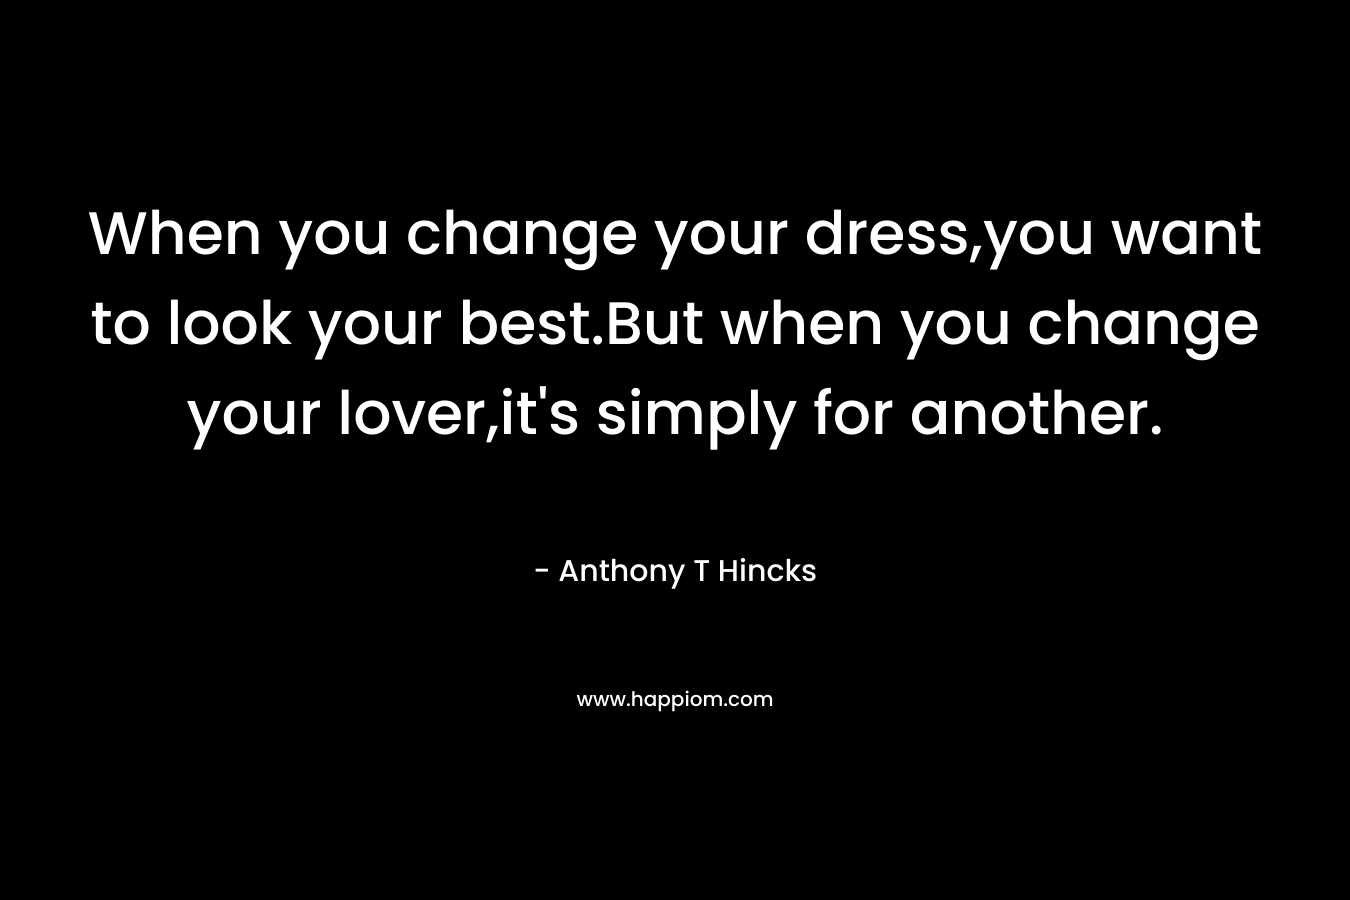 When you change your dress,you want to look your best.But when you change your lover,it's simply for another.